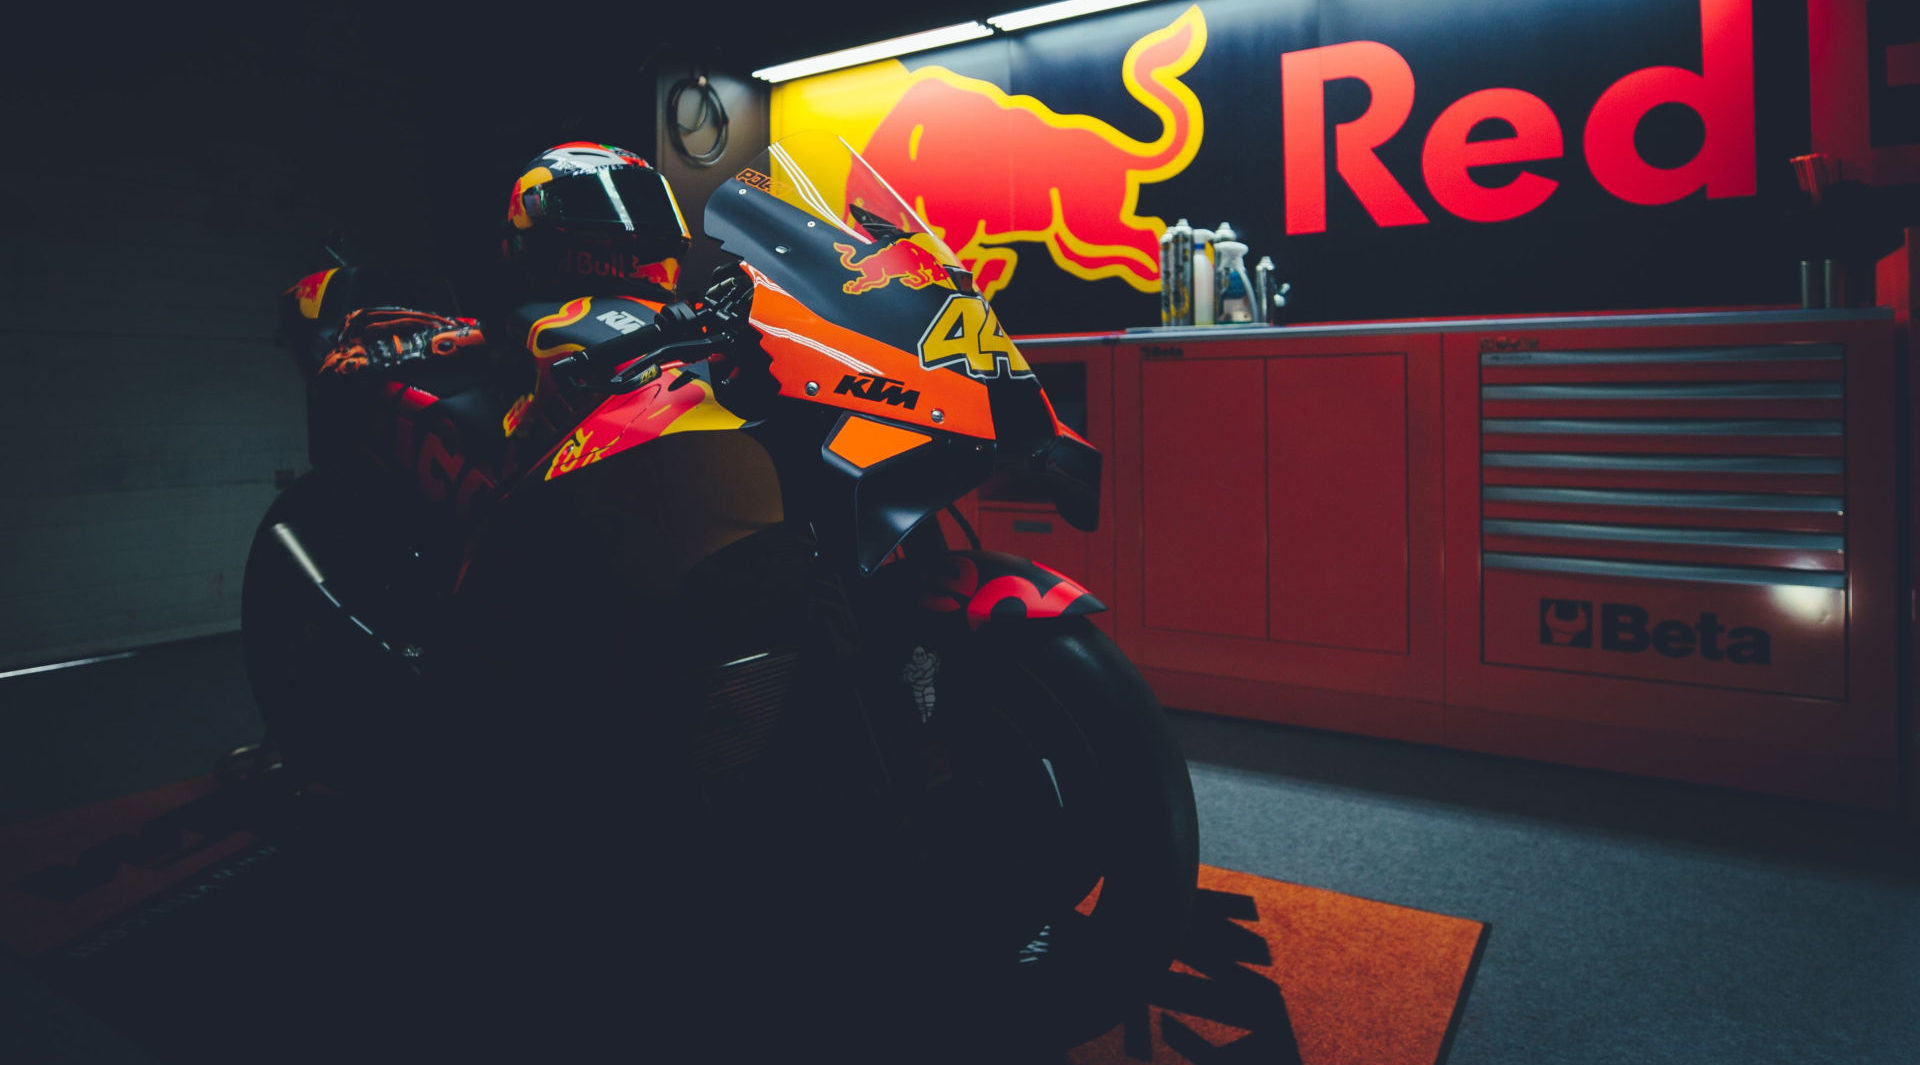 Pol Espargaro's Red Bull KTM RC16 MotoGP racebike at rest. Photo by Polarity Photo, courtesy KTM Factory Racing.